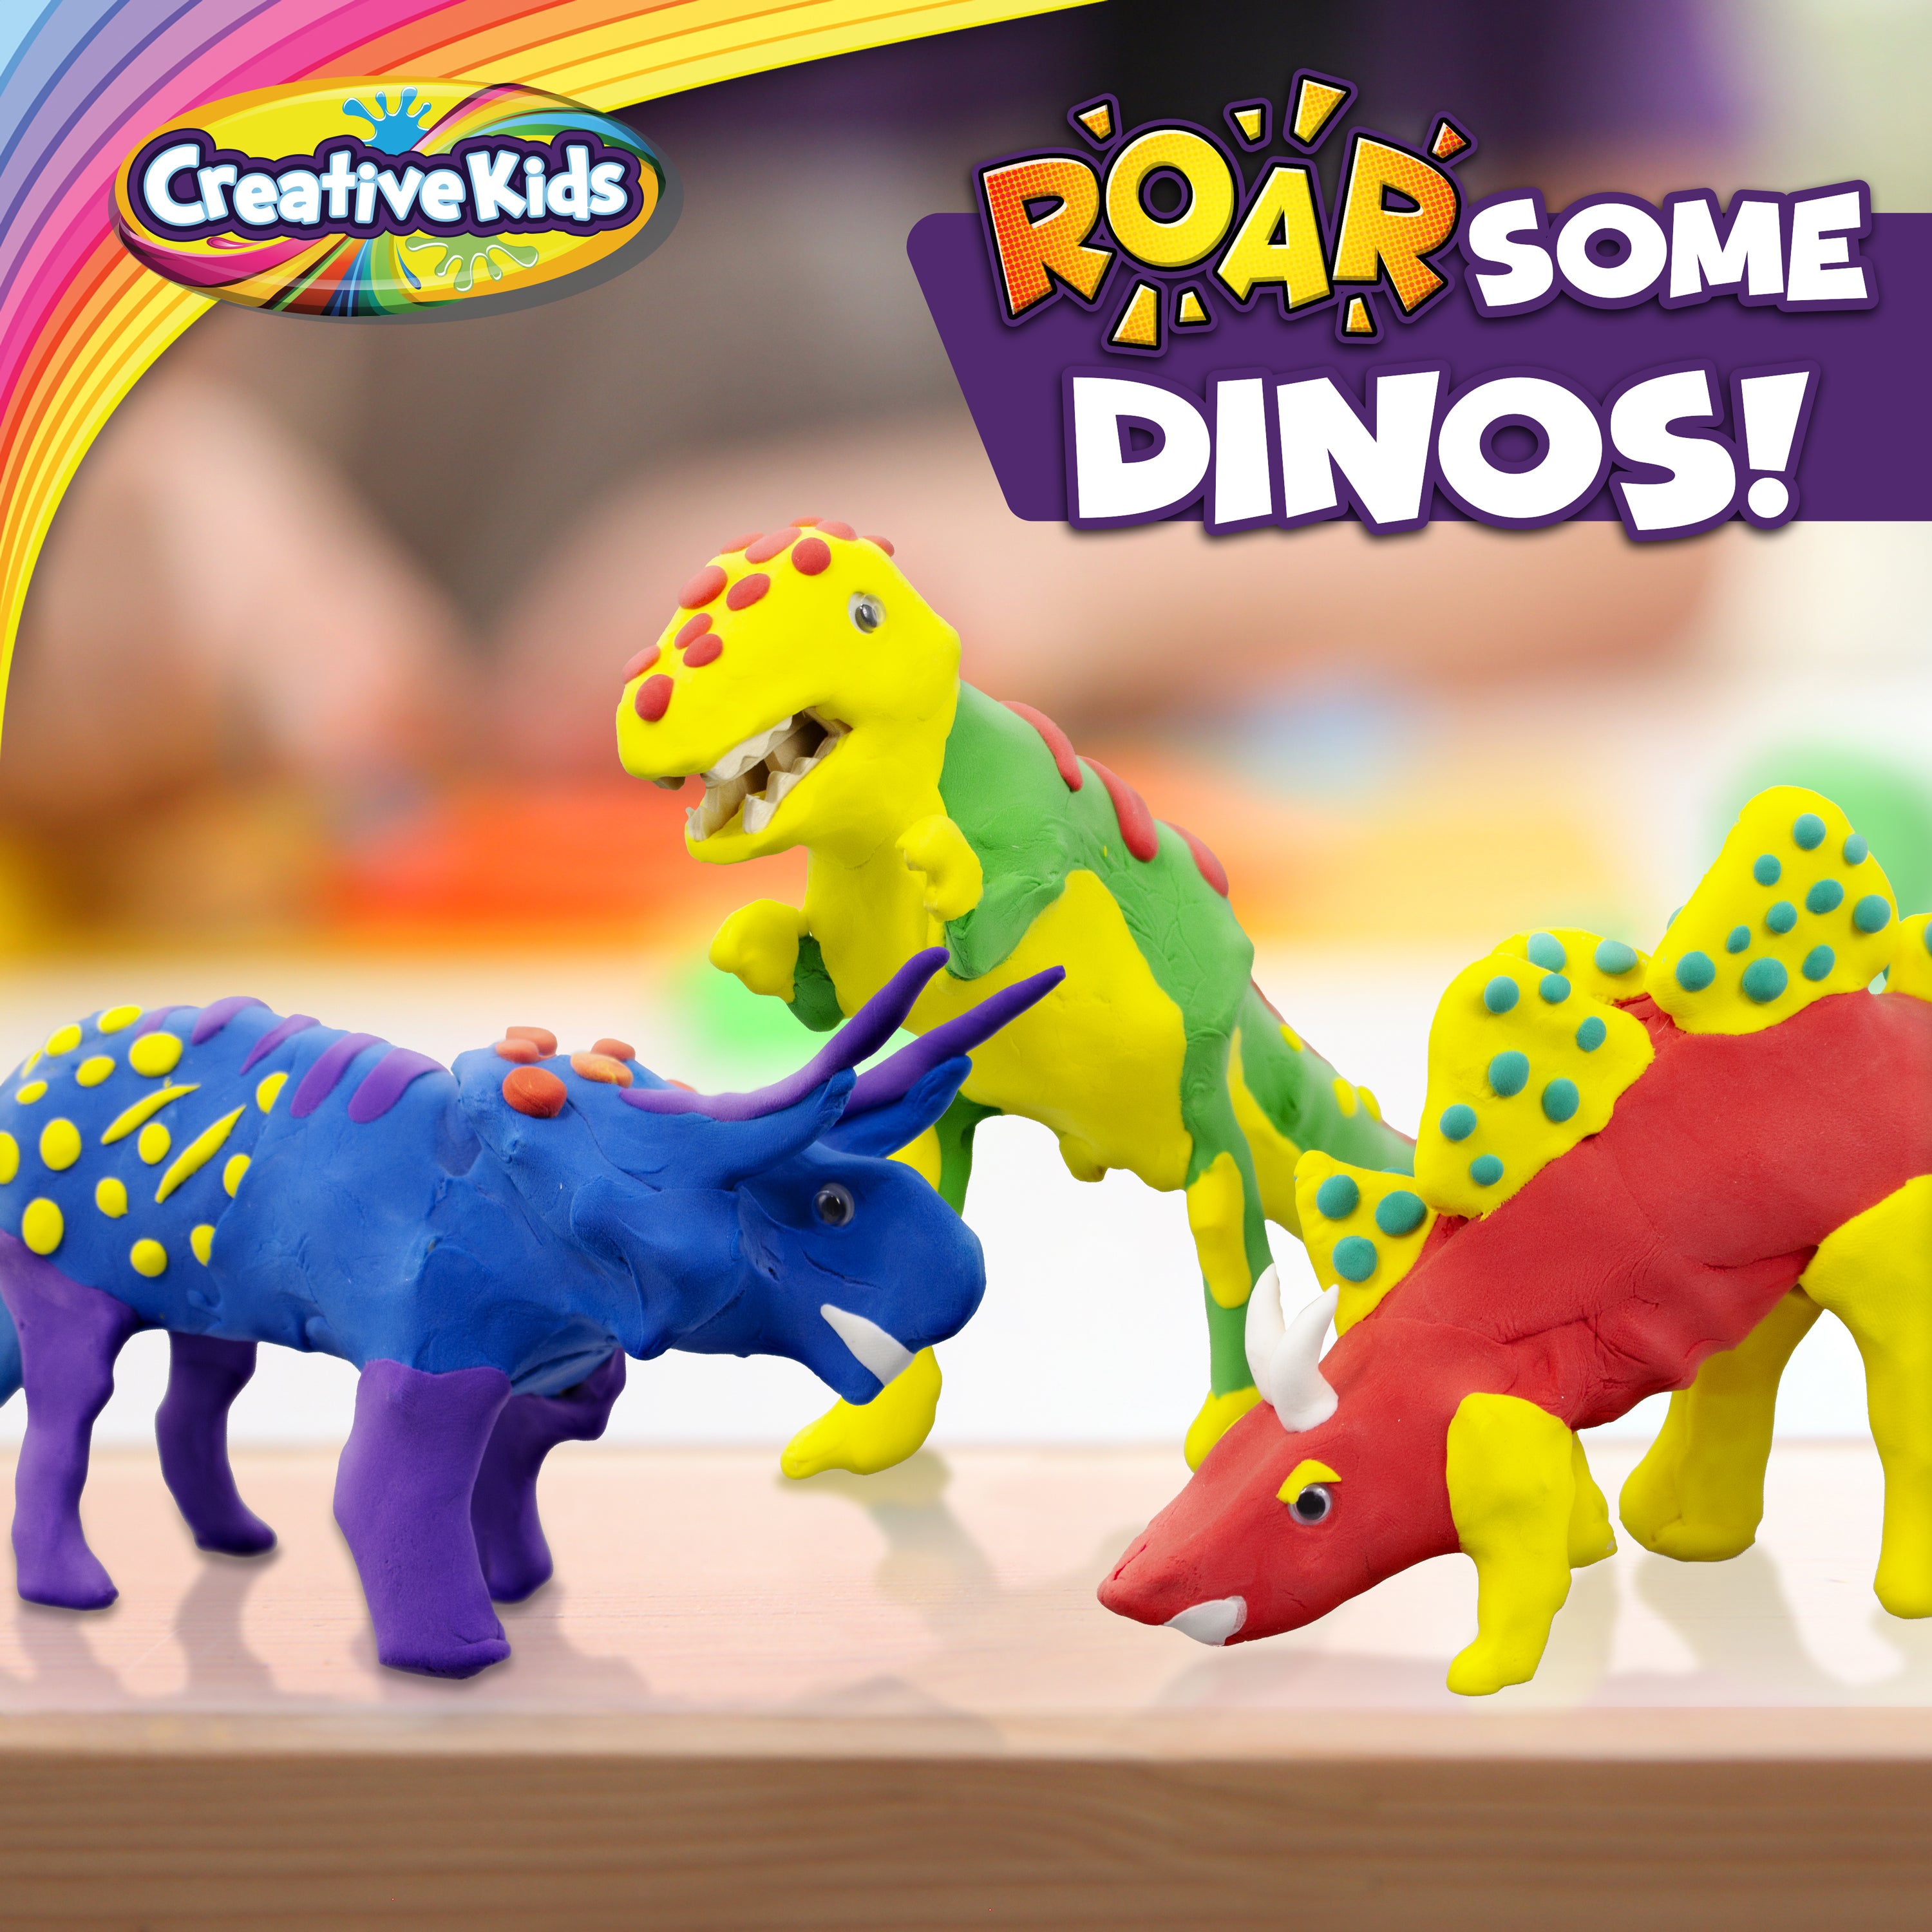  Sense&Play Air Dry Clay Dinosaur Craft Kit for Kids Create with  6 Dino Skeletons Educational STEM Toy - Modeling Clay Air Dry Set for Boys  & Girls Ages 6-12 : Toys & Games